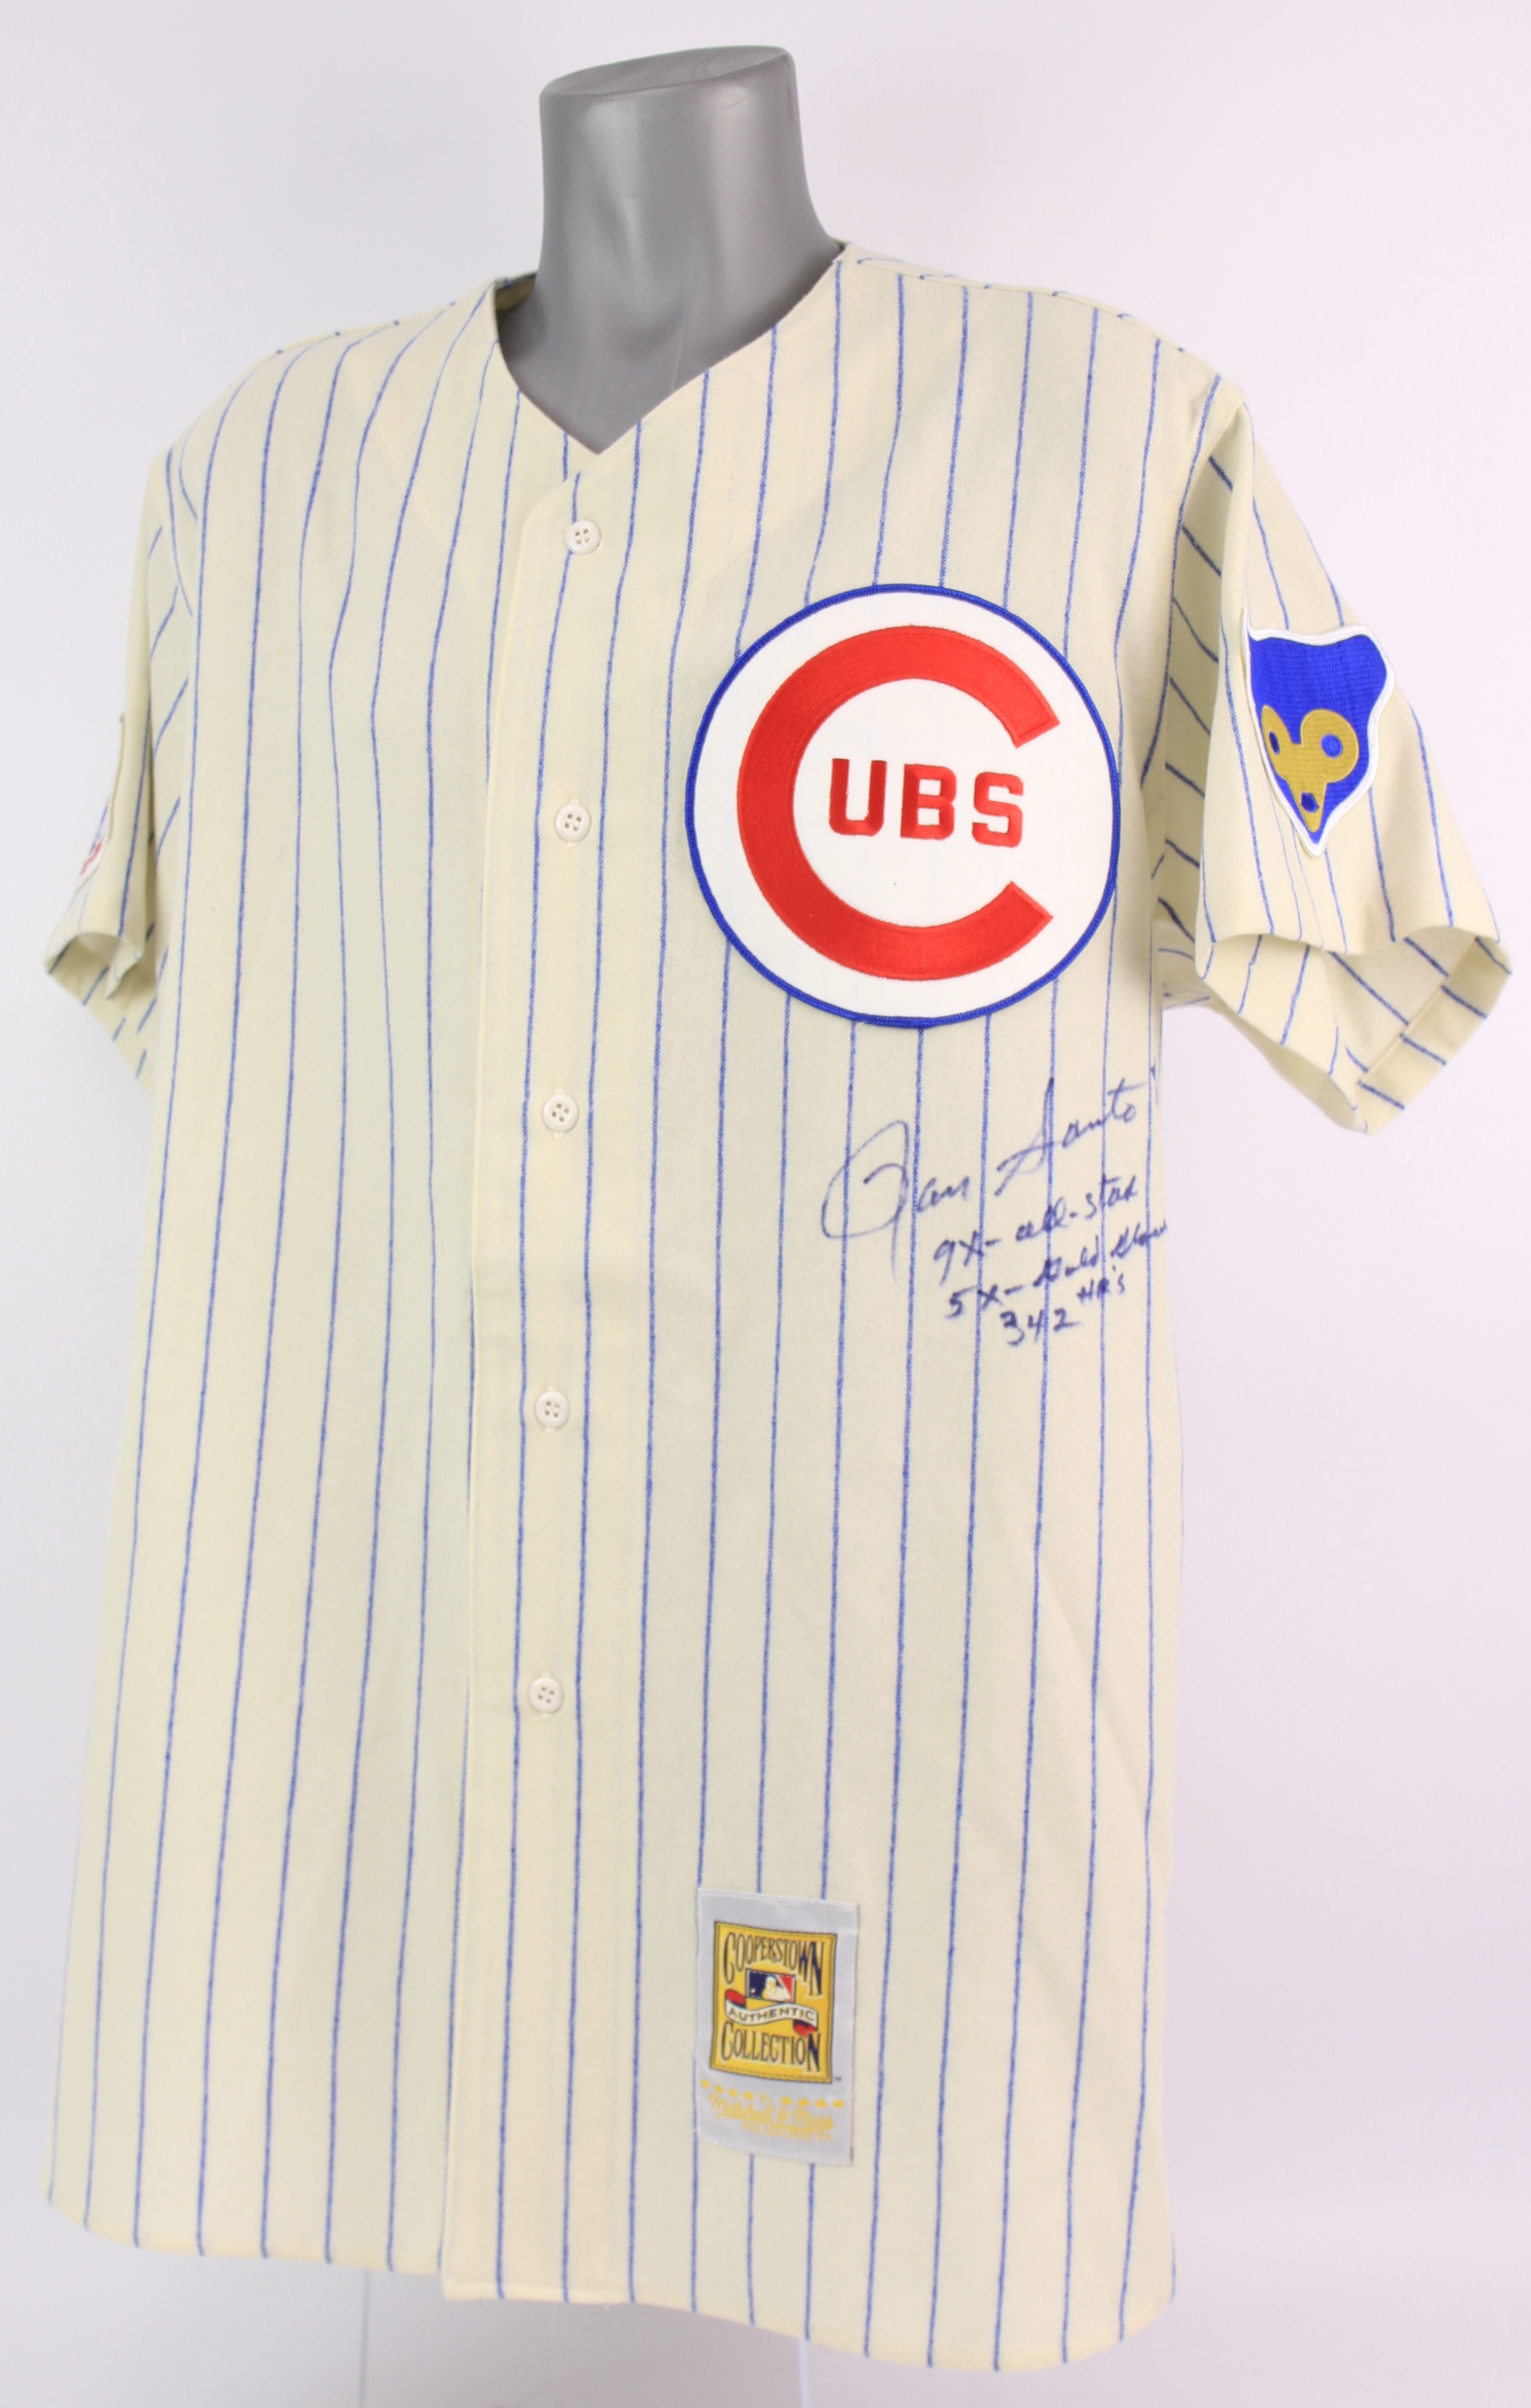 ron santo signed jersey